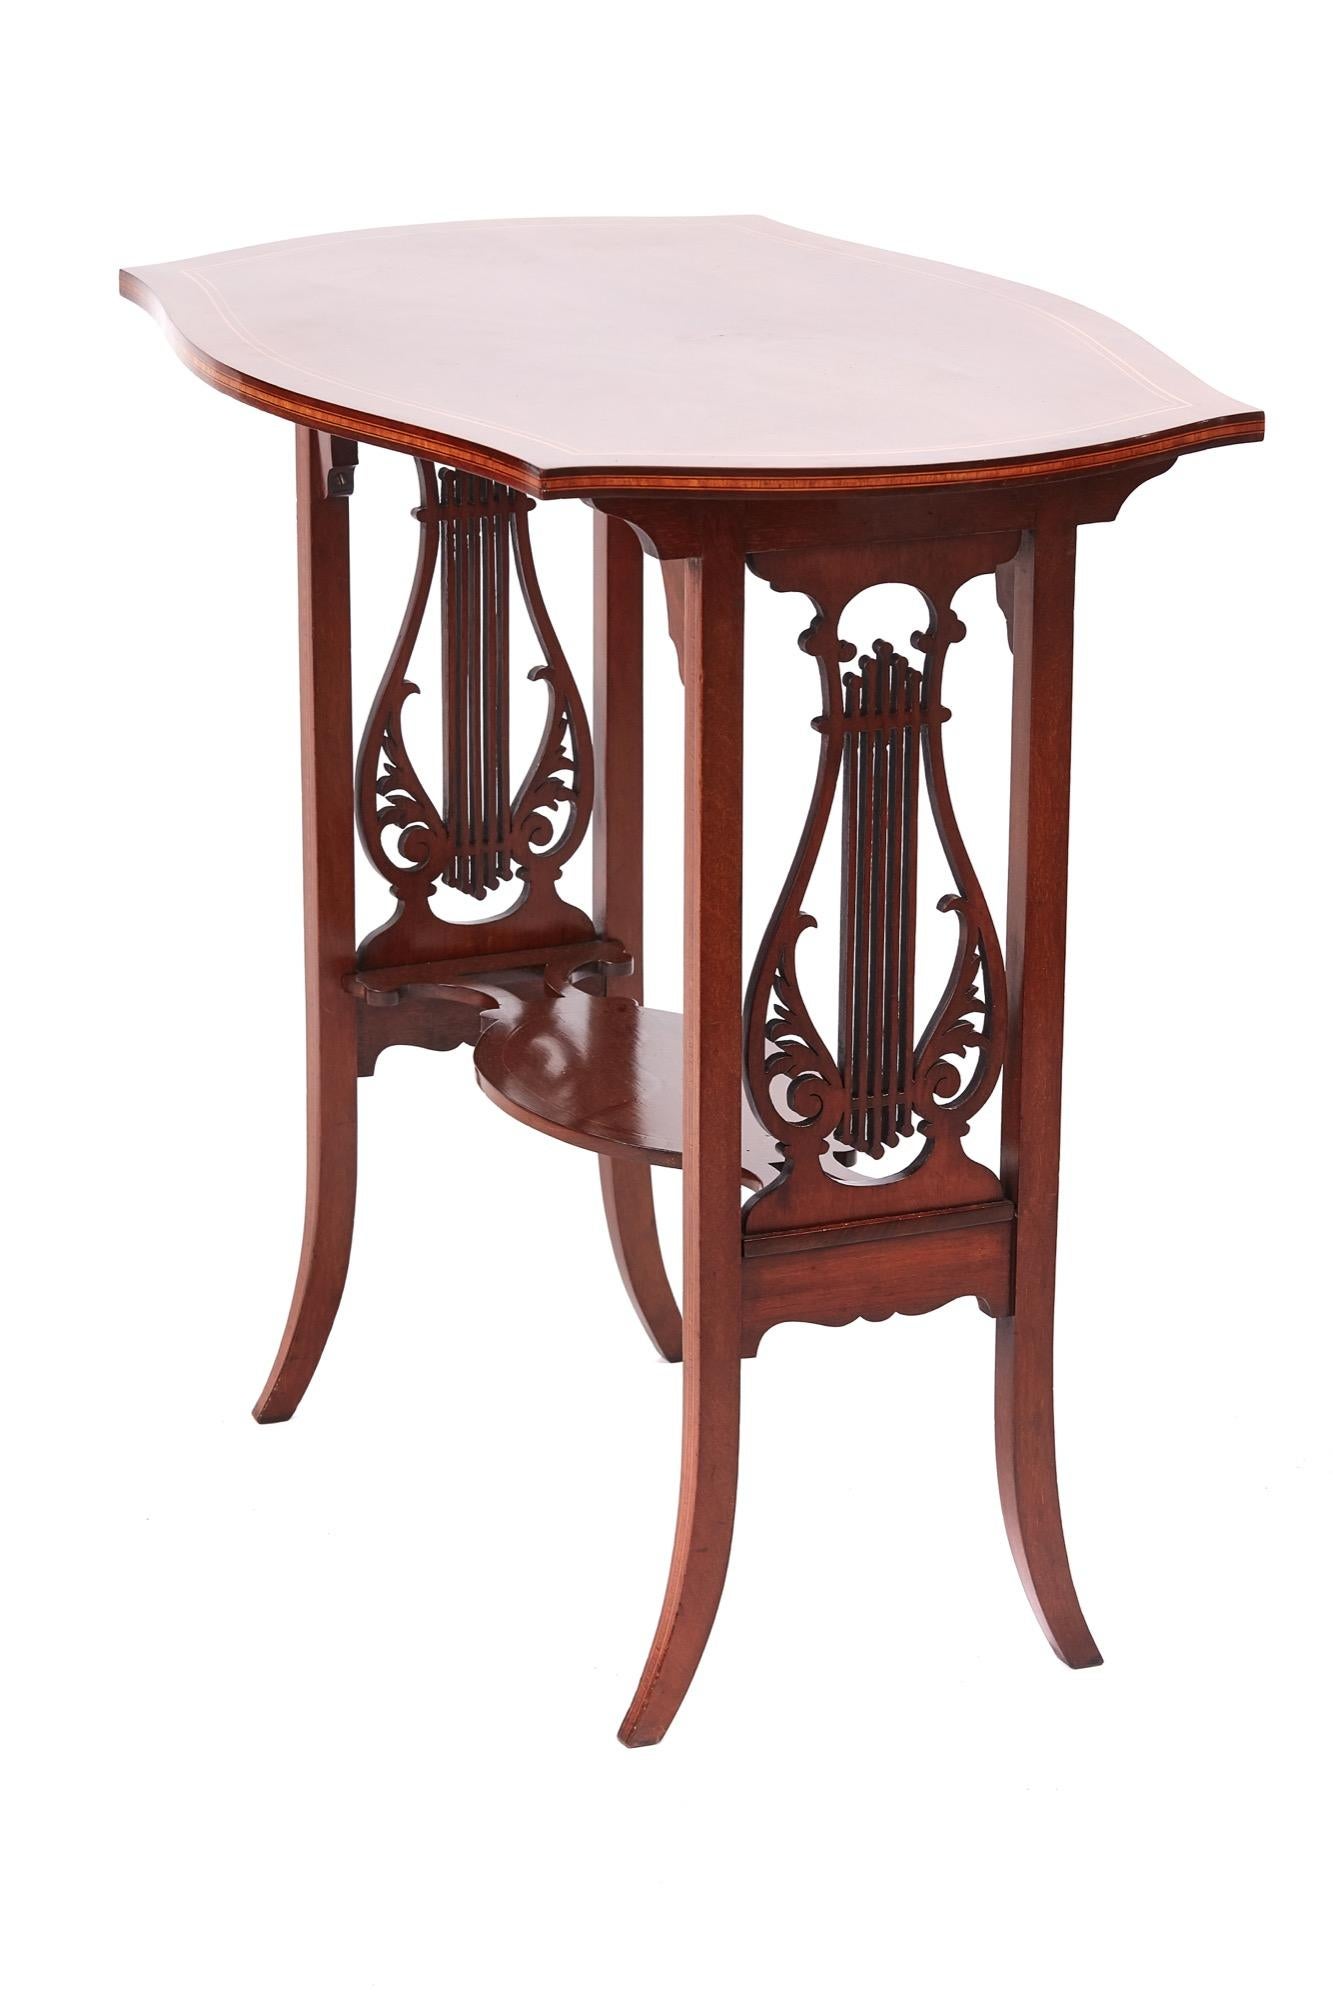 20th Century Quality Edwardian Mahogany Inlaid Lamp Table For Sale